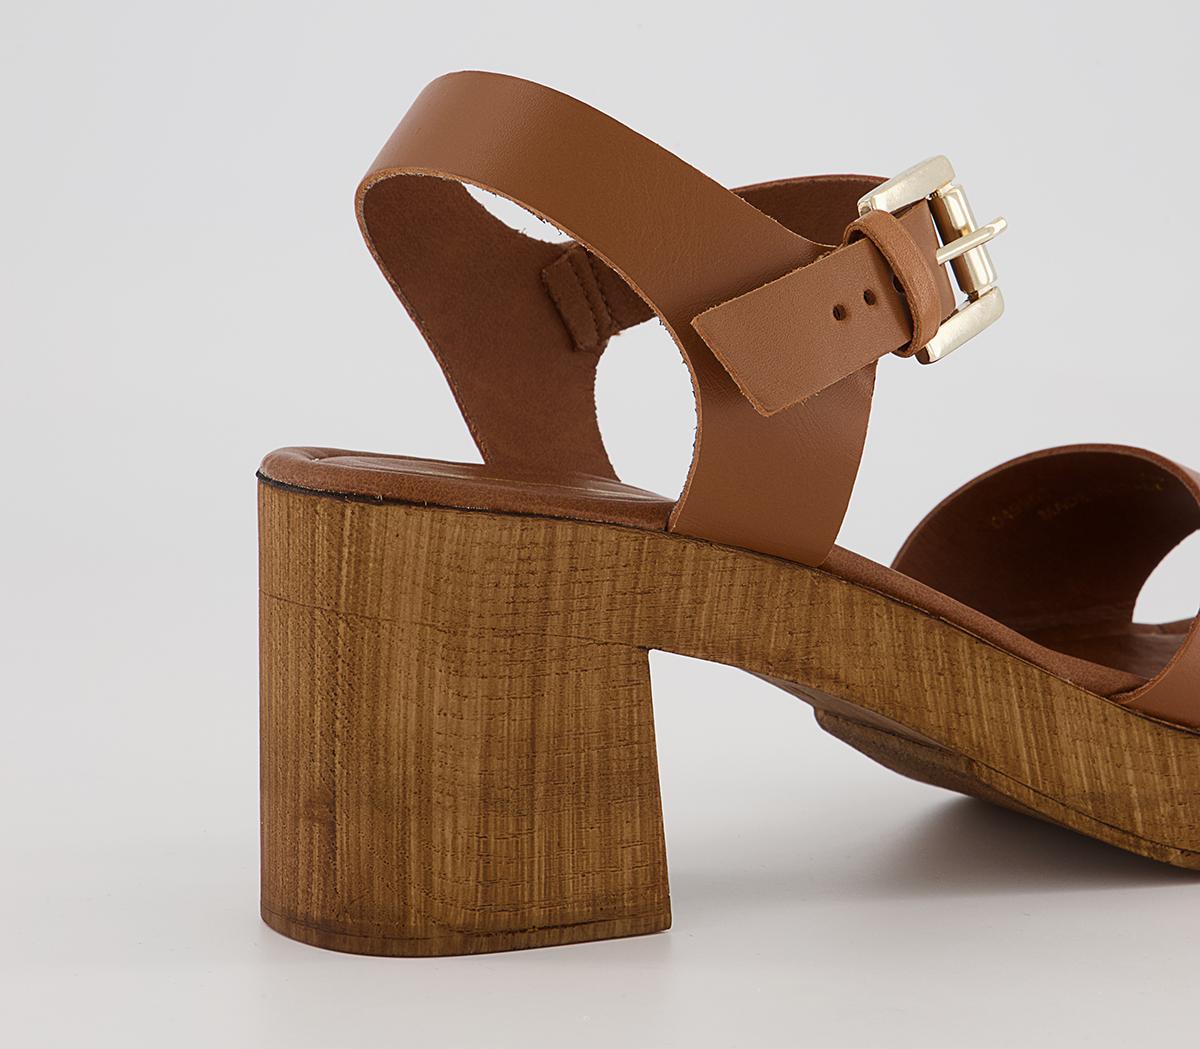 OFFICE Maeve Wood Effect Sandals Tan Leather - Mid Heels